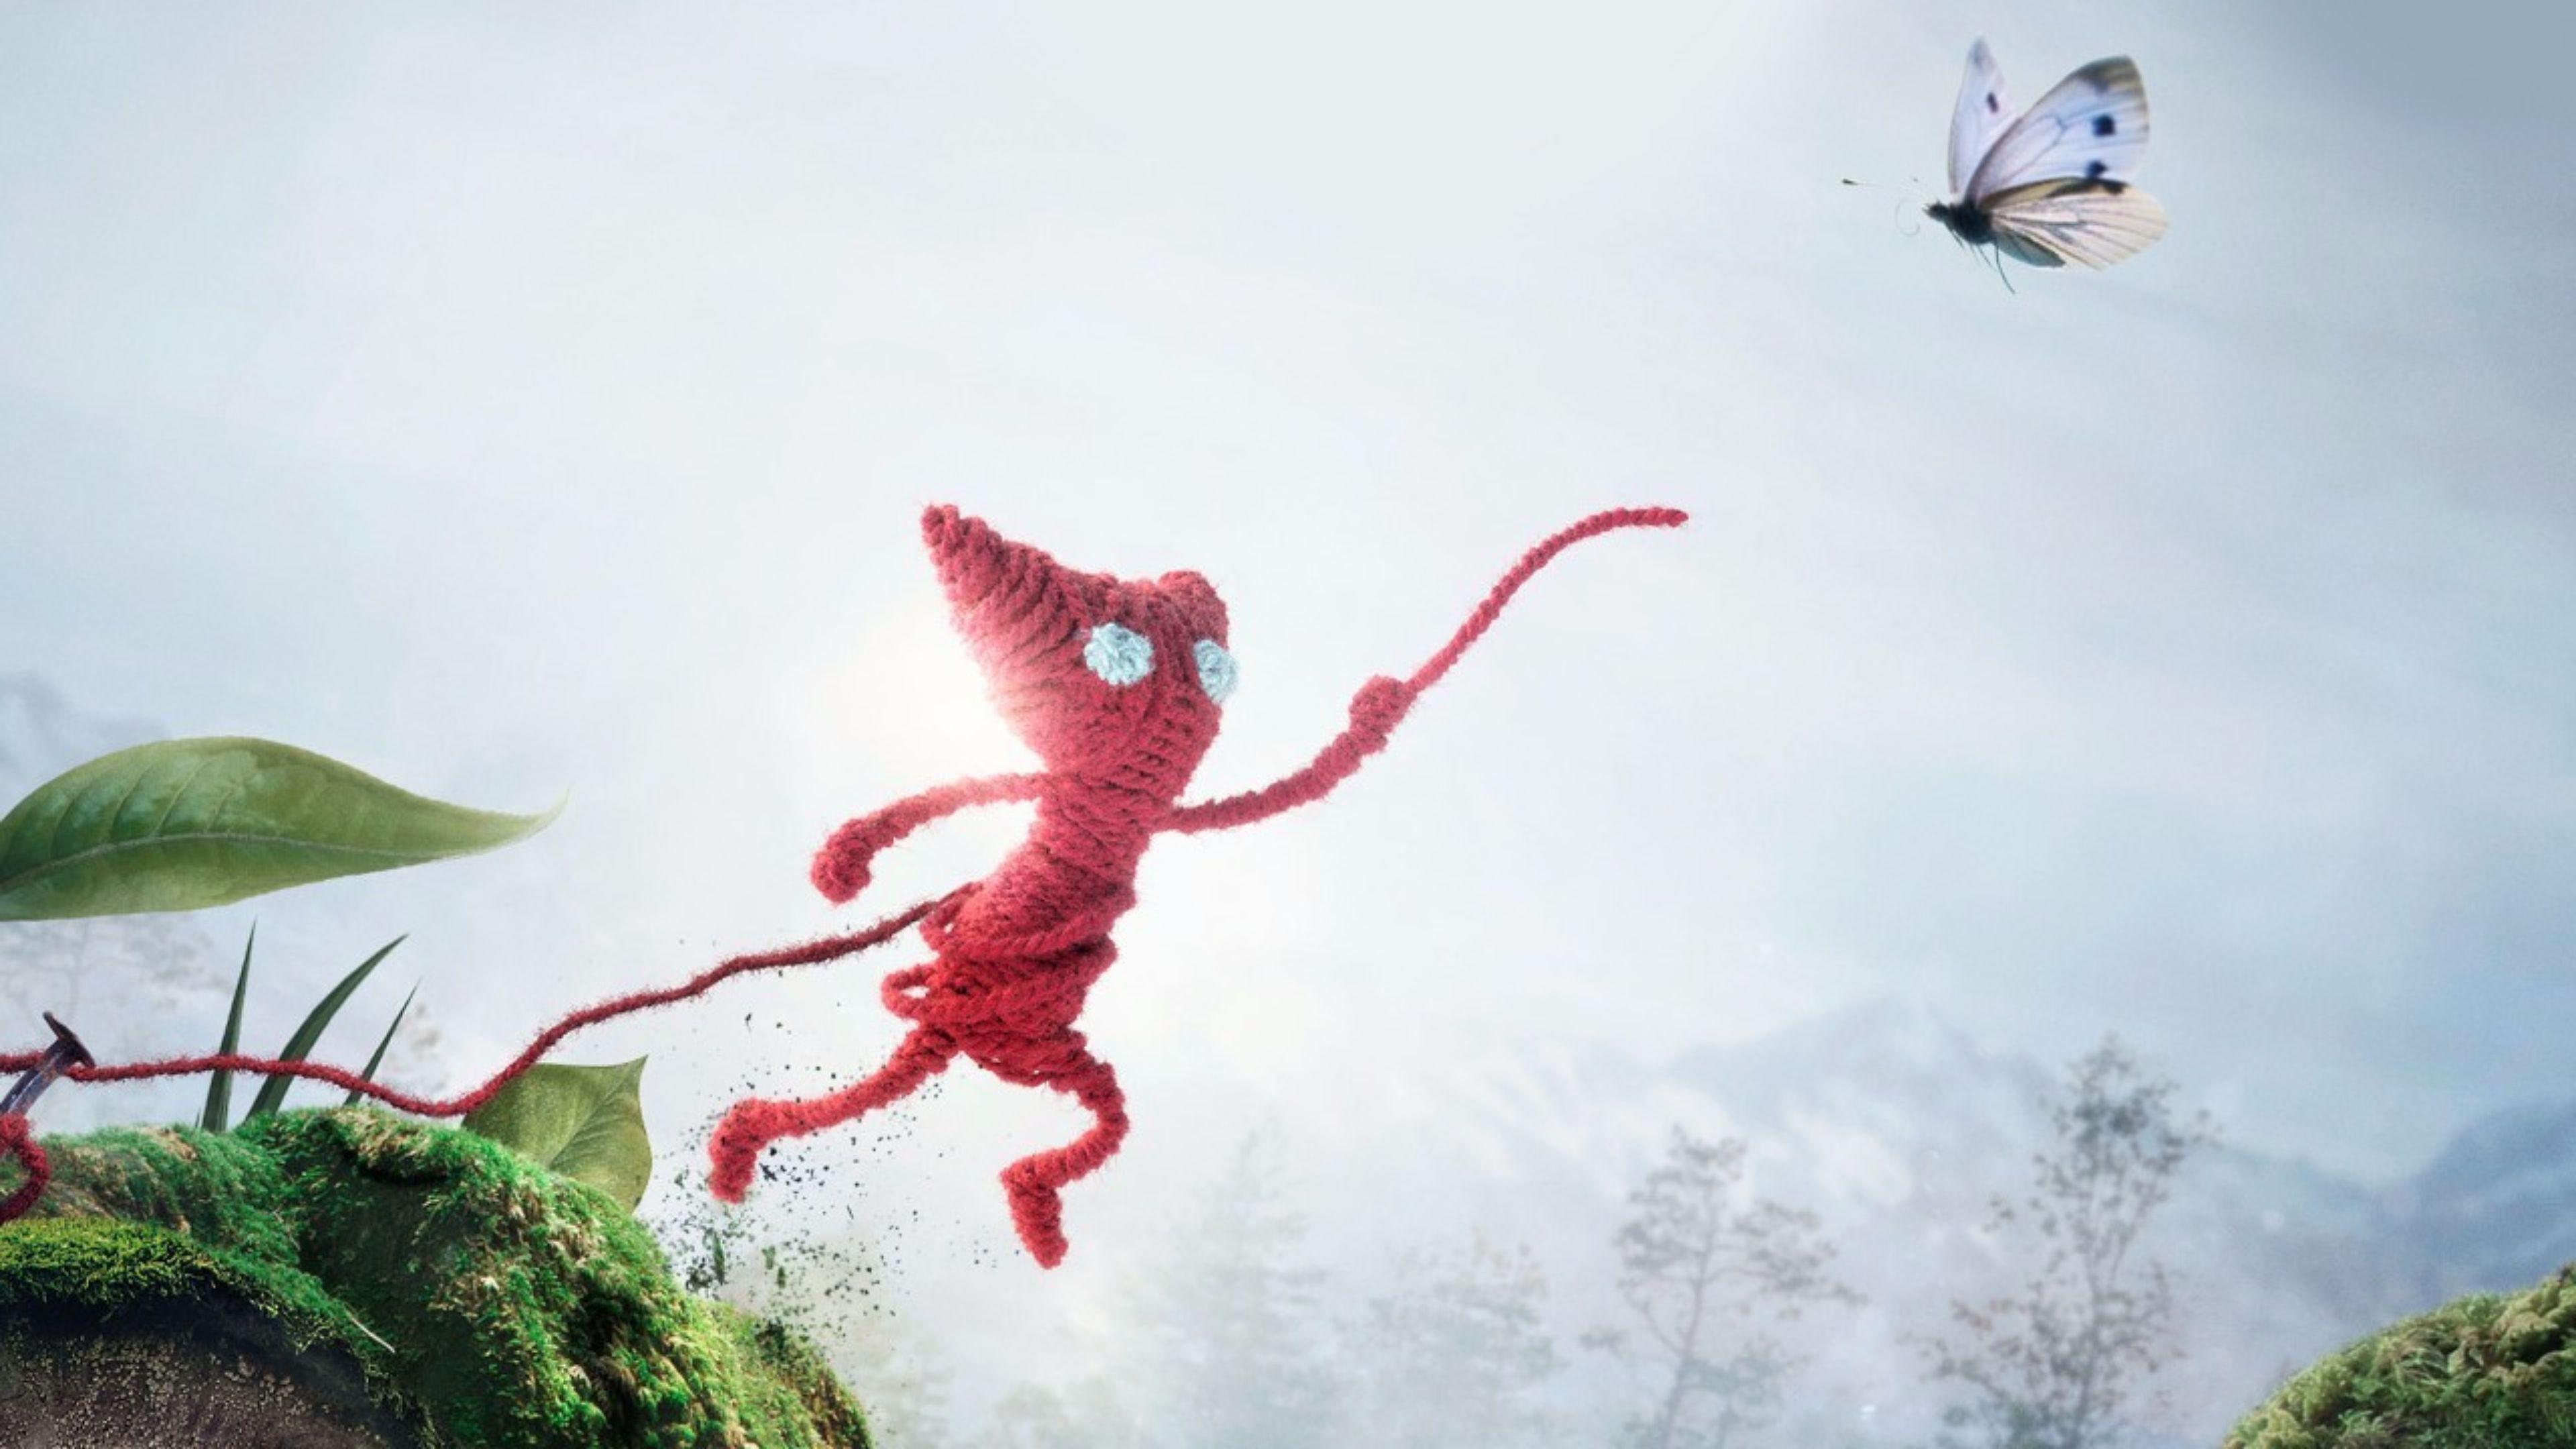 Download wallpaper 1280x800 unravel two, game, yarn, full hd, hdtv